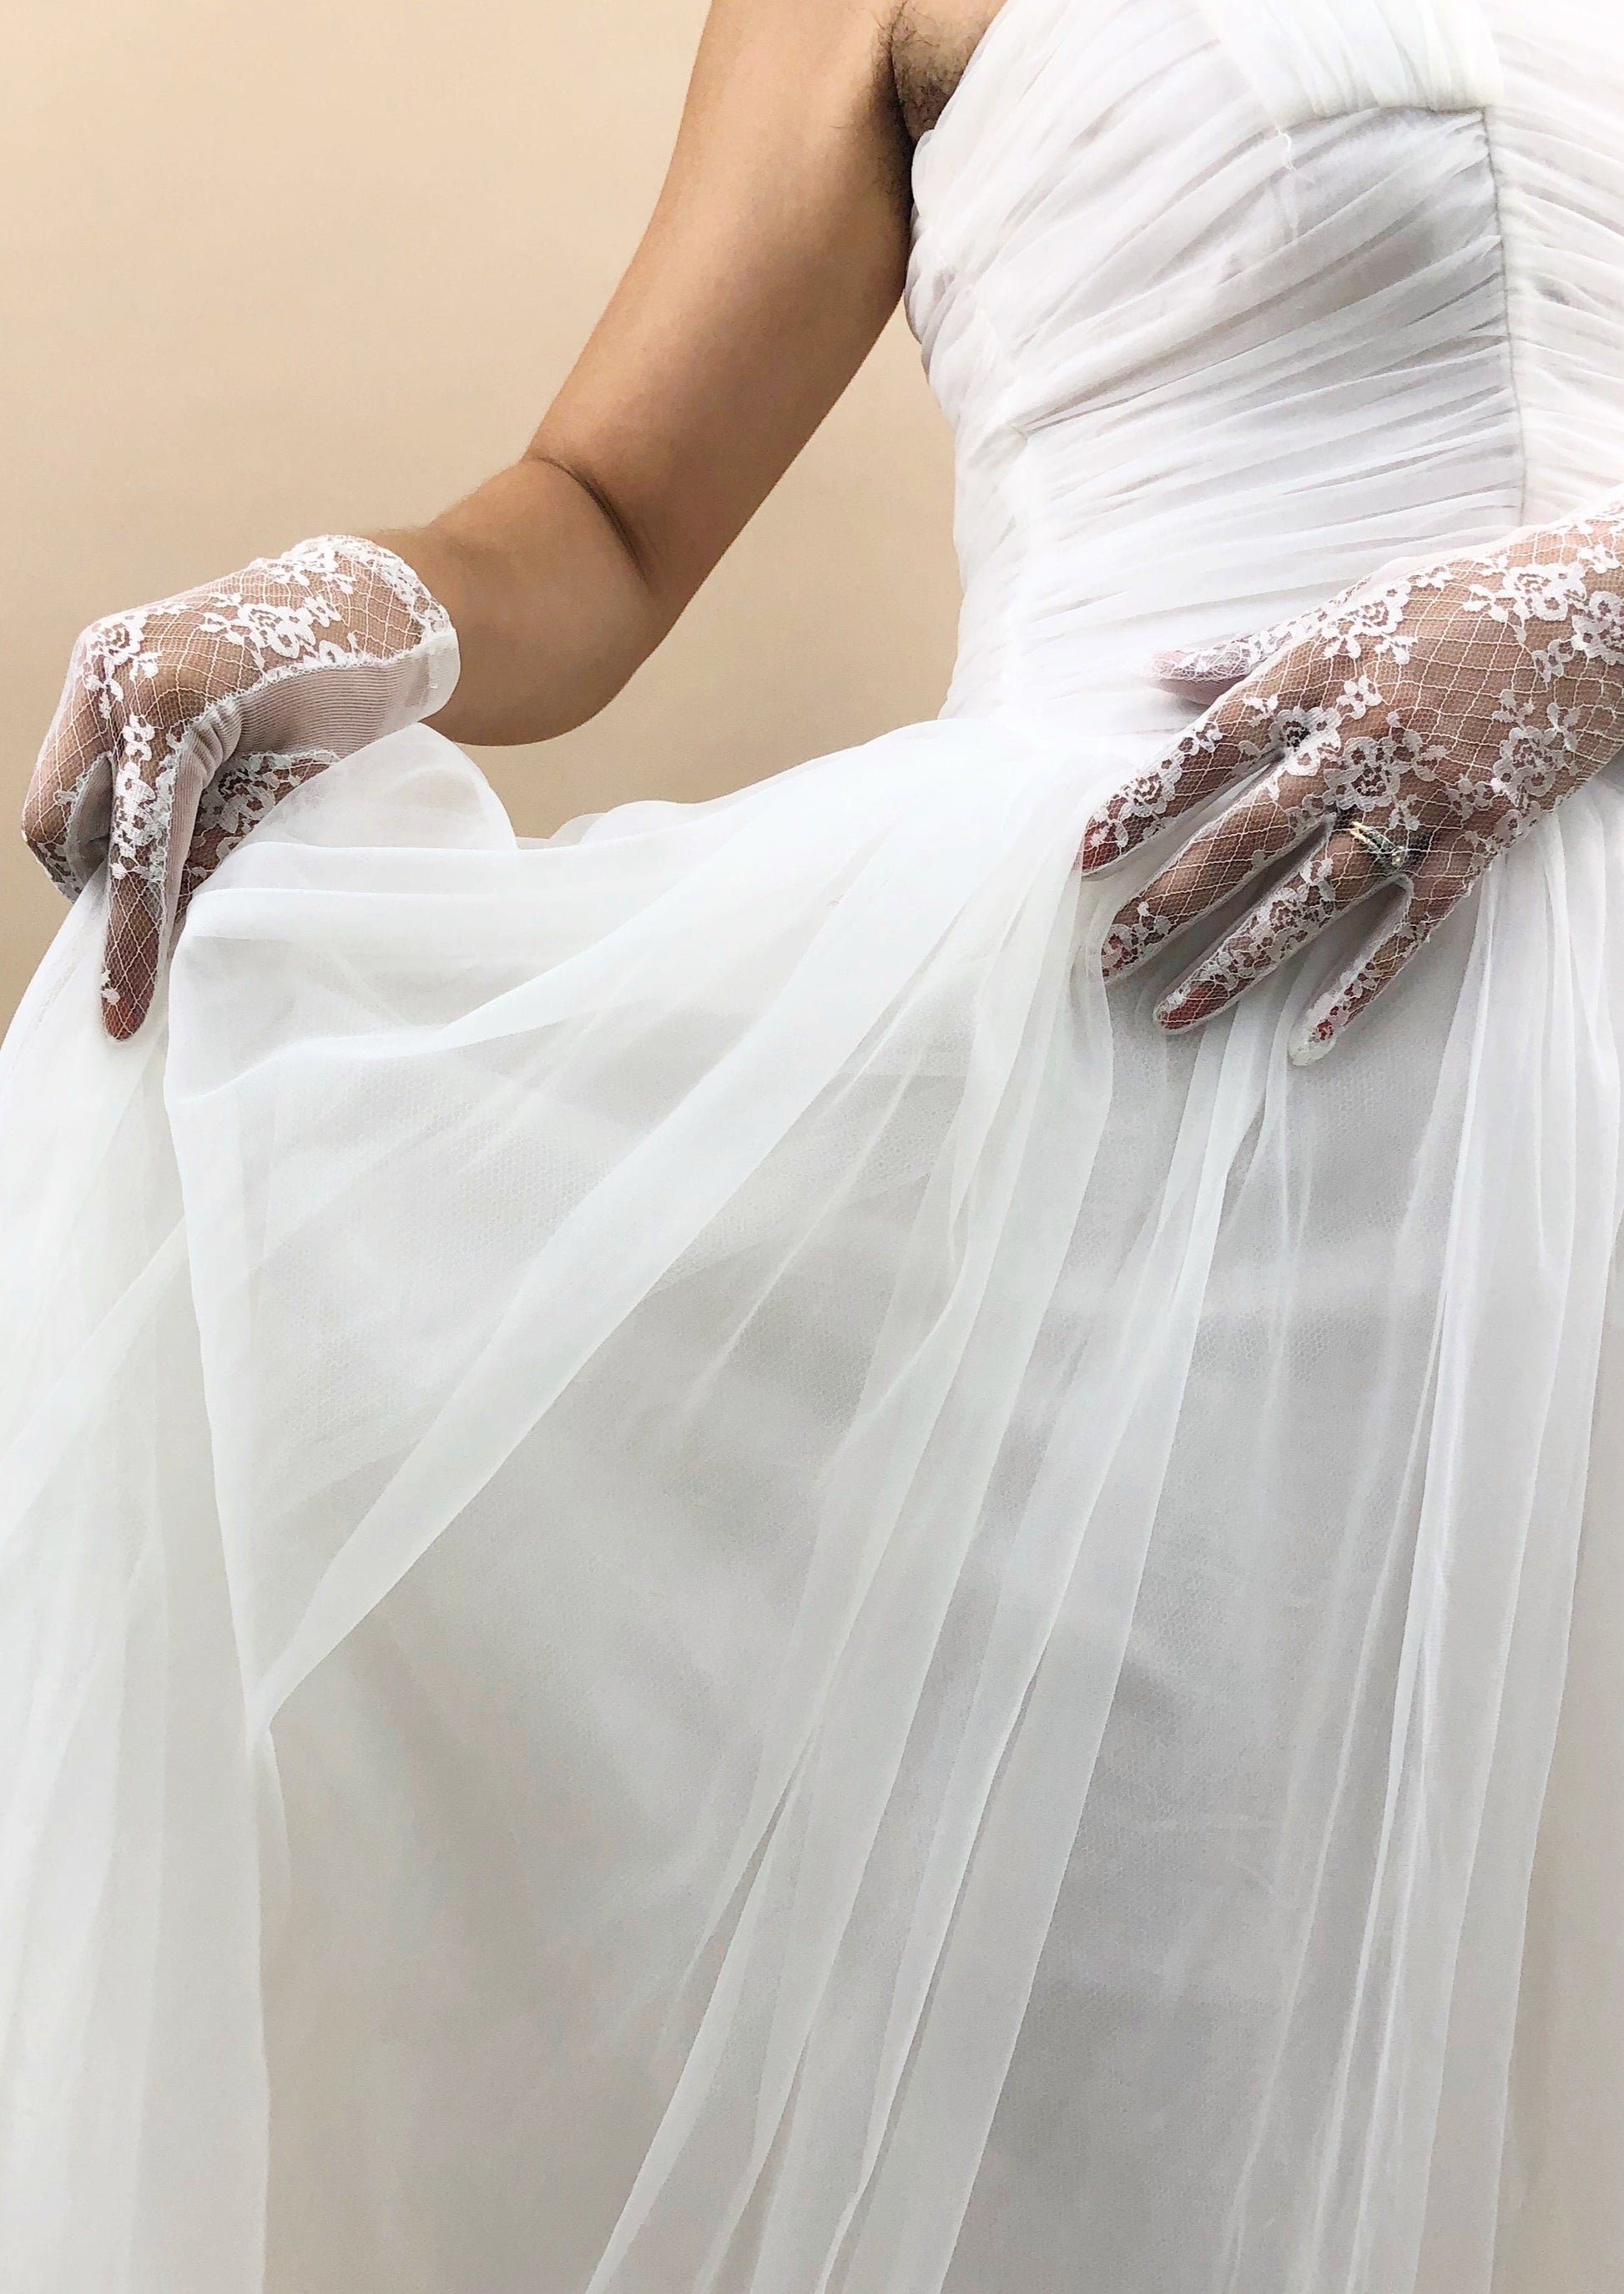 hands with gloves on, holding chiffon dress up